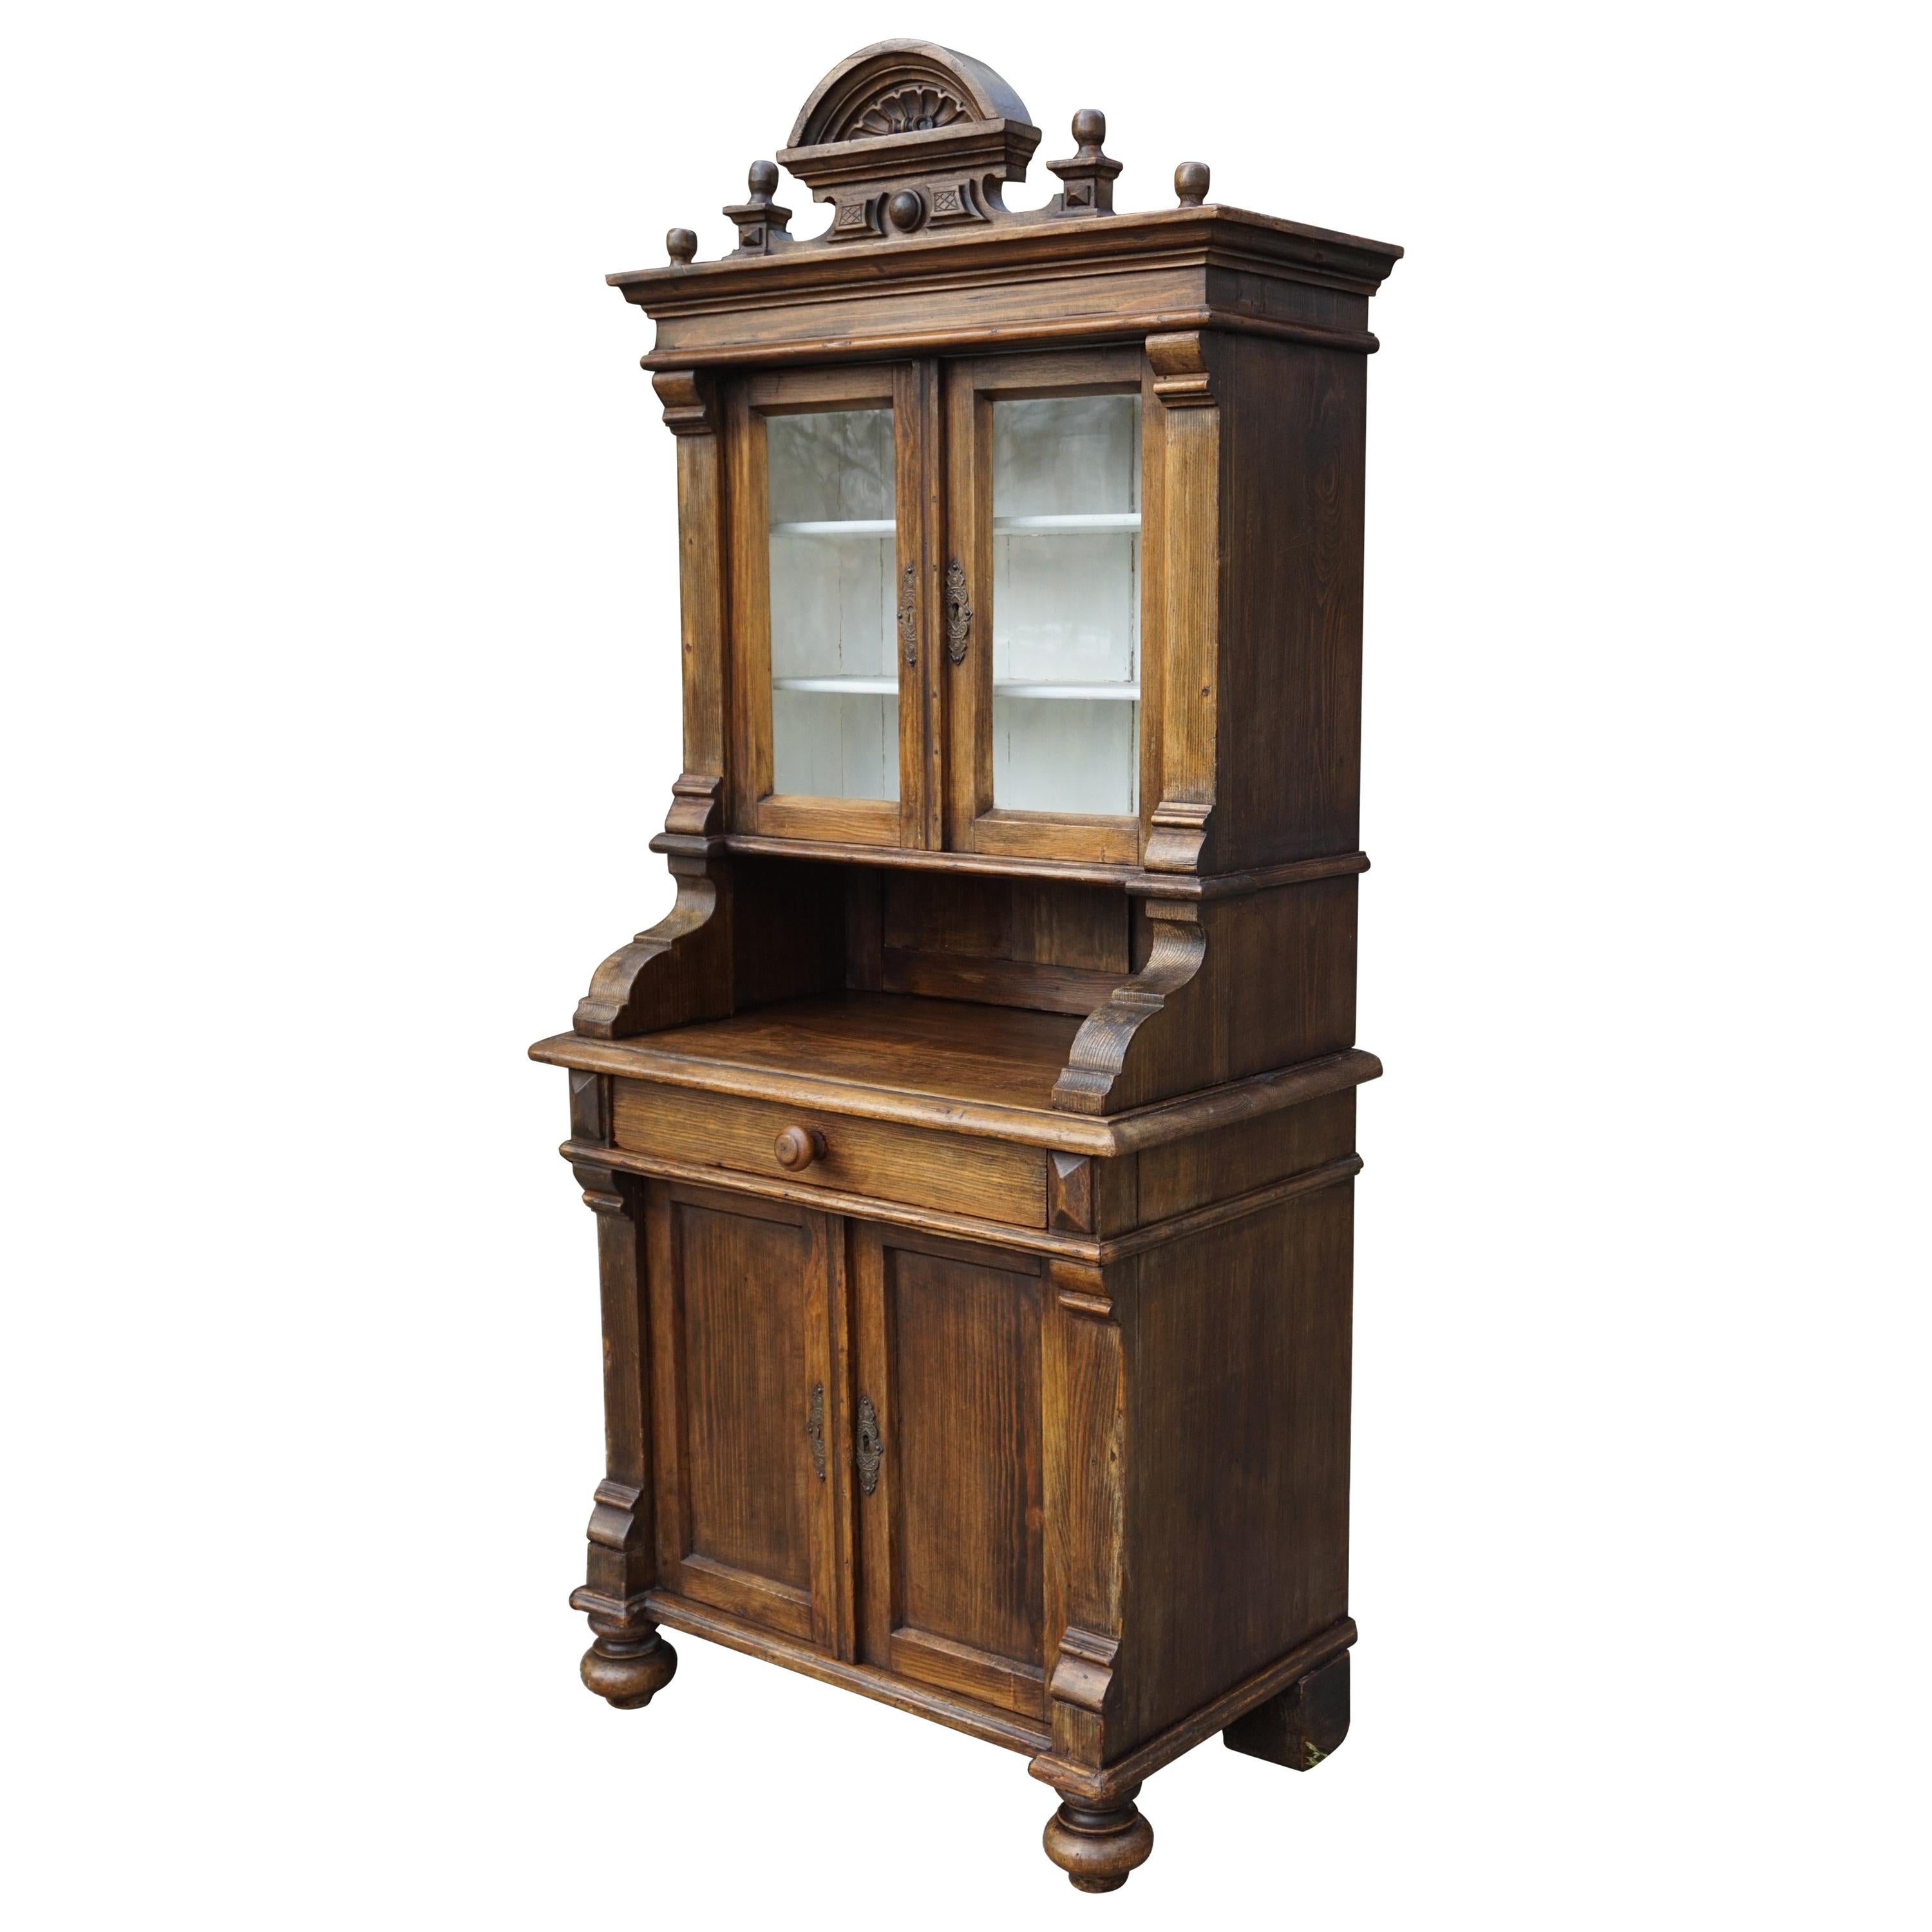 The House of Antiques Miniature Country House Sideboard / Kitchen Cabinet Late 1800s fait à la main